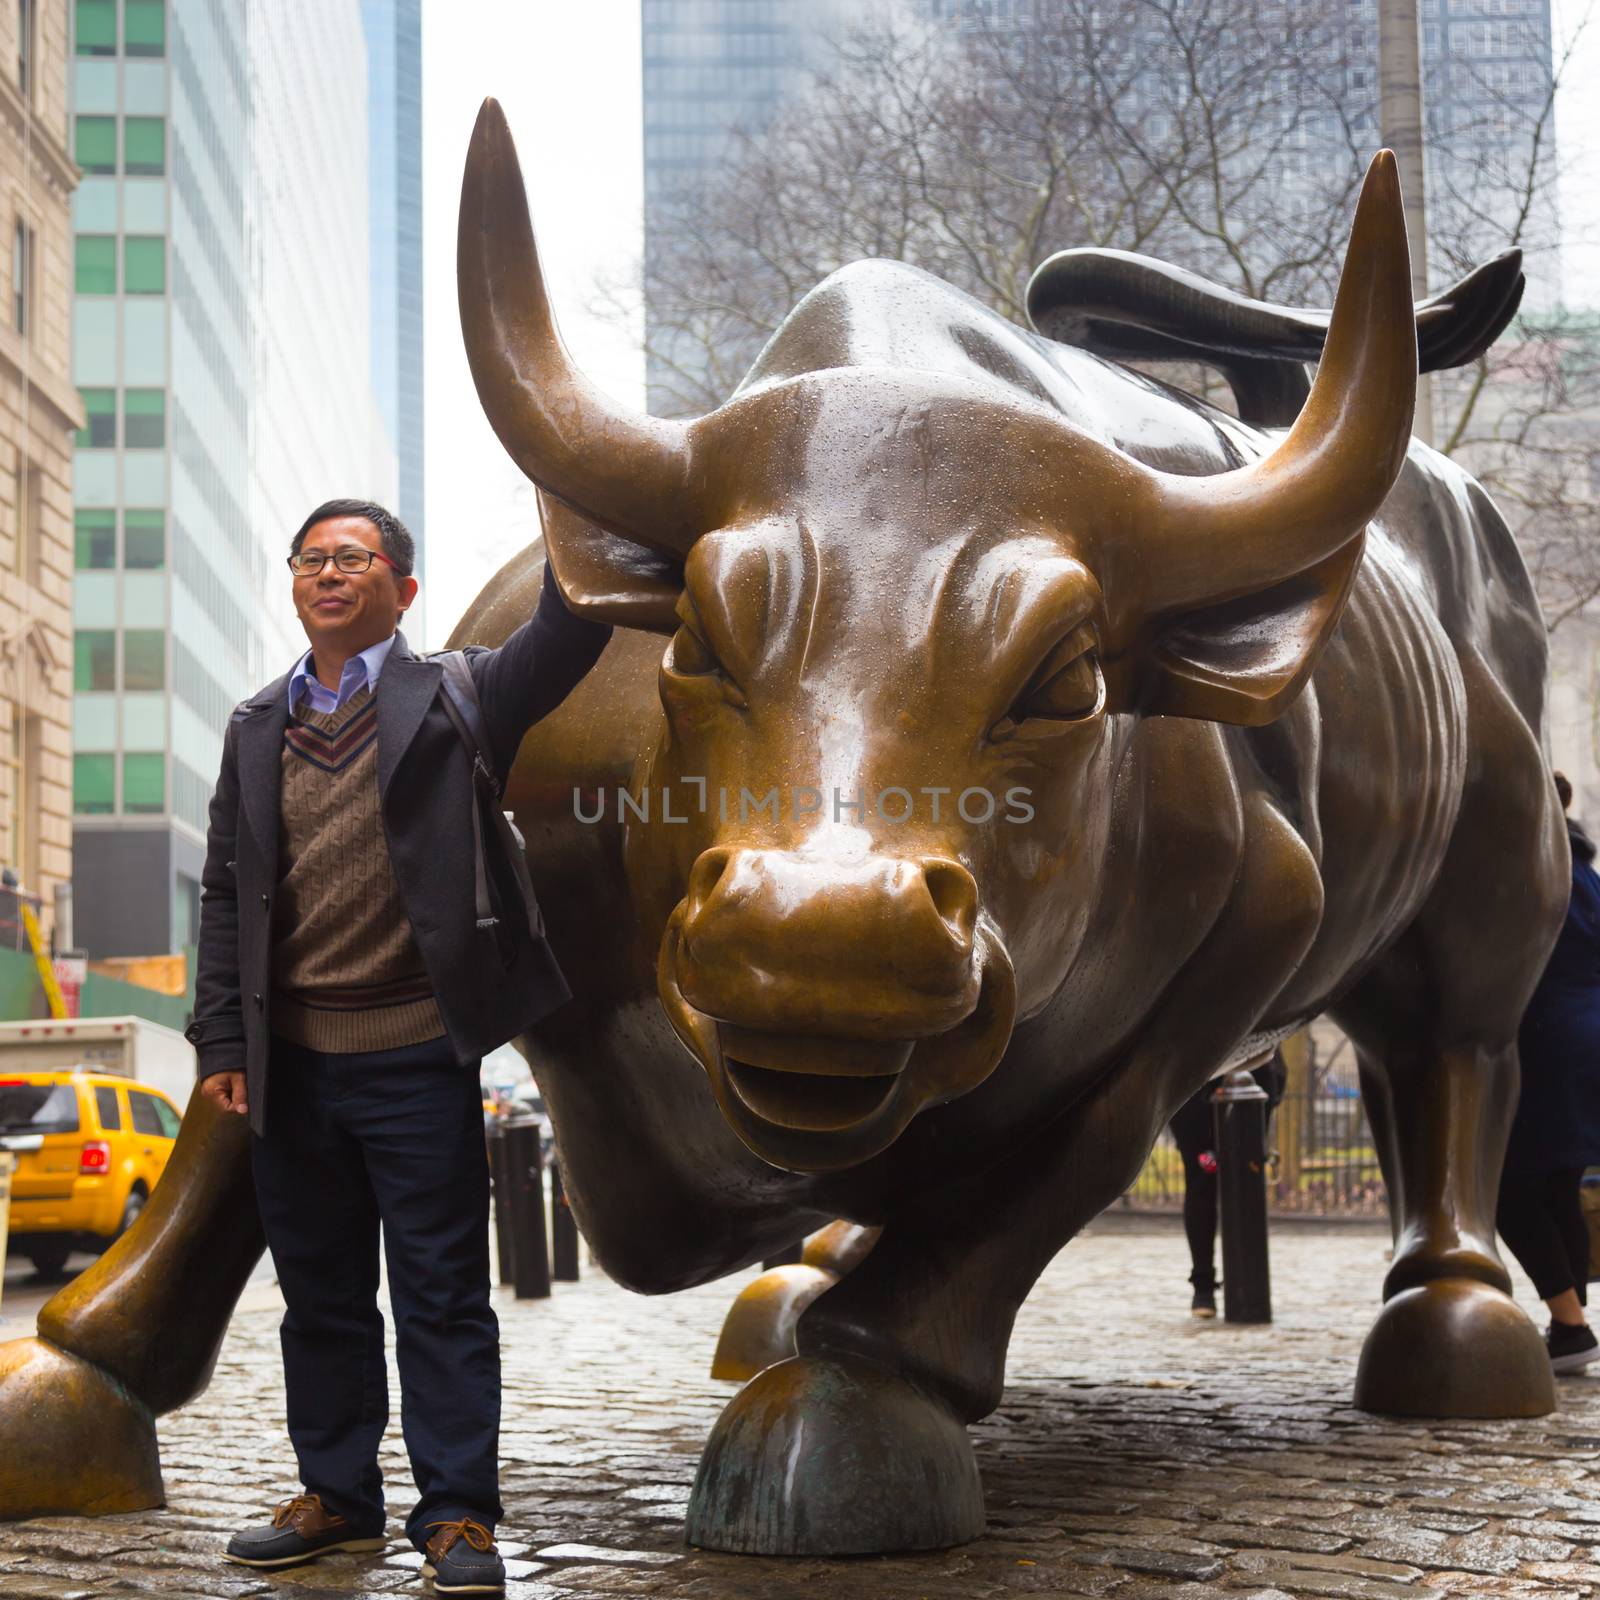 NEW YORK CITY - MAR 26: The landmark Charging Bull in Lower Manhattan represents aggressive financial optimism and prosperity March 26, 2015 in New York, NY, United States of America.